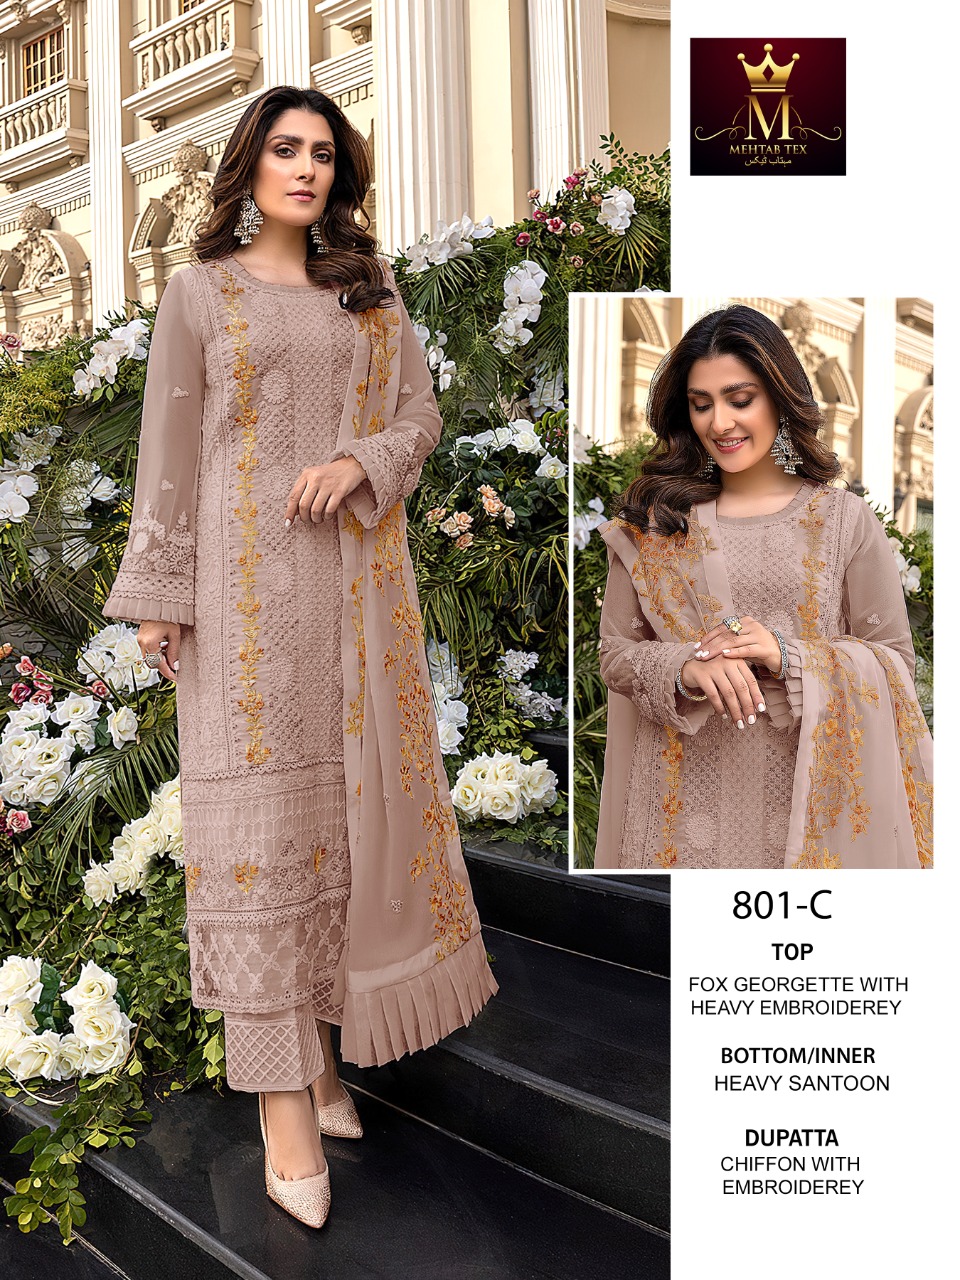 Mehtab Tex Hit Collection 801-C